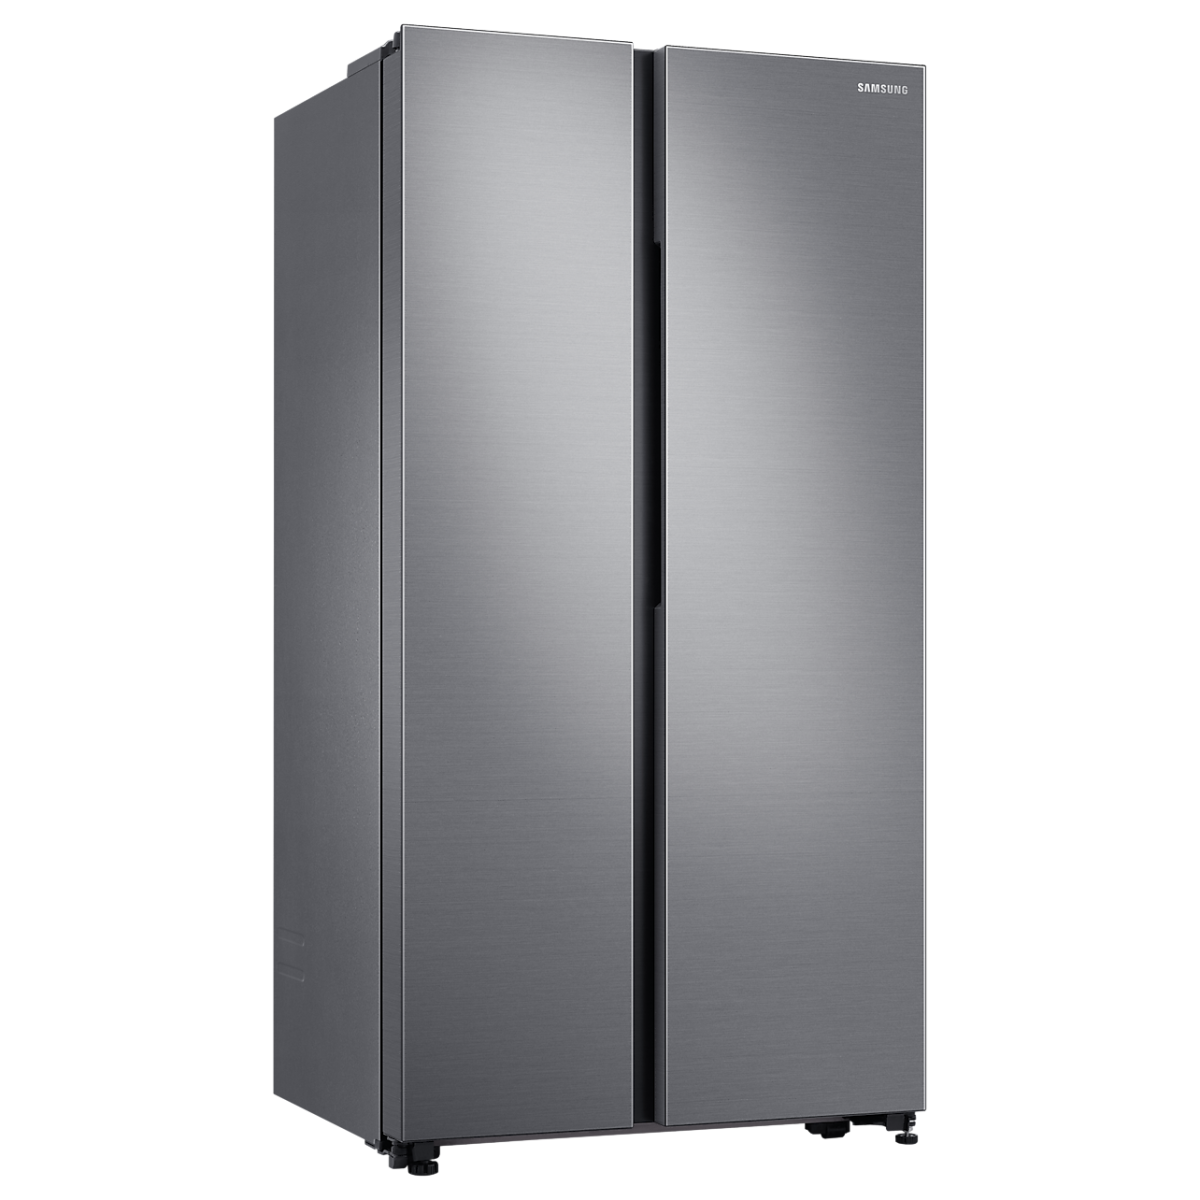 SAMSUNG 700 Liter Inverter Refrigerator with SpaceMax Technology RS72R5001M9/D2 , Best Refrigerators of Year, Top-rated Refrigerators, Refrigerator Reviews, Refrigerator Comparison, Buying a Refrigerator Guide, Refrigerator Deals and Offers Best Refrigerators of Year, Top-rated Refrigerators, Refrigerator Reviews, Refrigerator Comparison, Buying a Refrigerator Guide, Refrigerator Deals and Offers, Best refrigerators in Chittagong, Best selling refrigerators in Chittagong, Best Electronics Store in Chittagong, Meem Electronics, MeemElectronics, Best Deal of Refrigerator, SAMSUNG Refrigerator price in Chittagong, SAMSUNG Refrigerator price in Bangladersh, 700 Liter Refrigerator, SAMSUNG Refrigerator, 01919382008, 01919382009, 019193820010